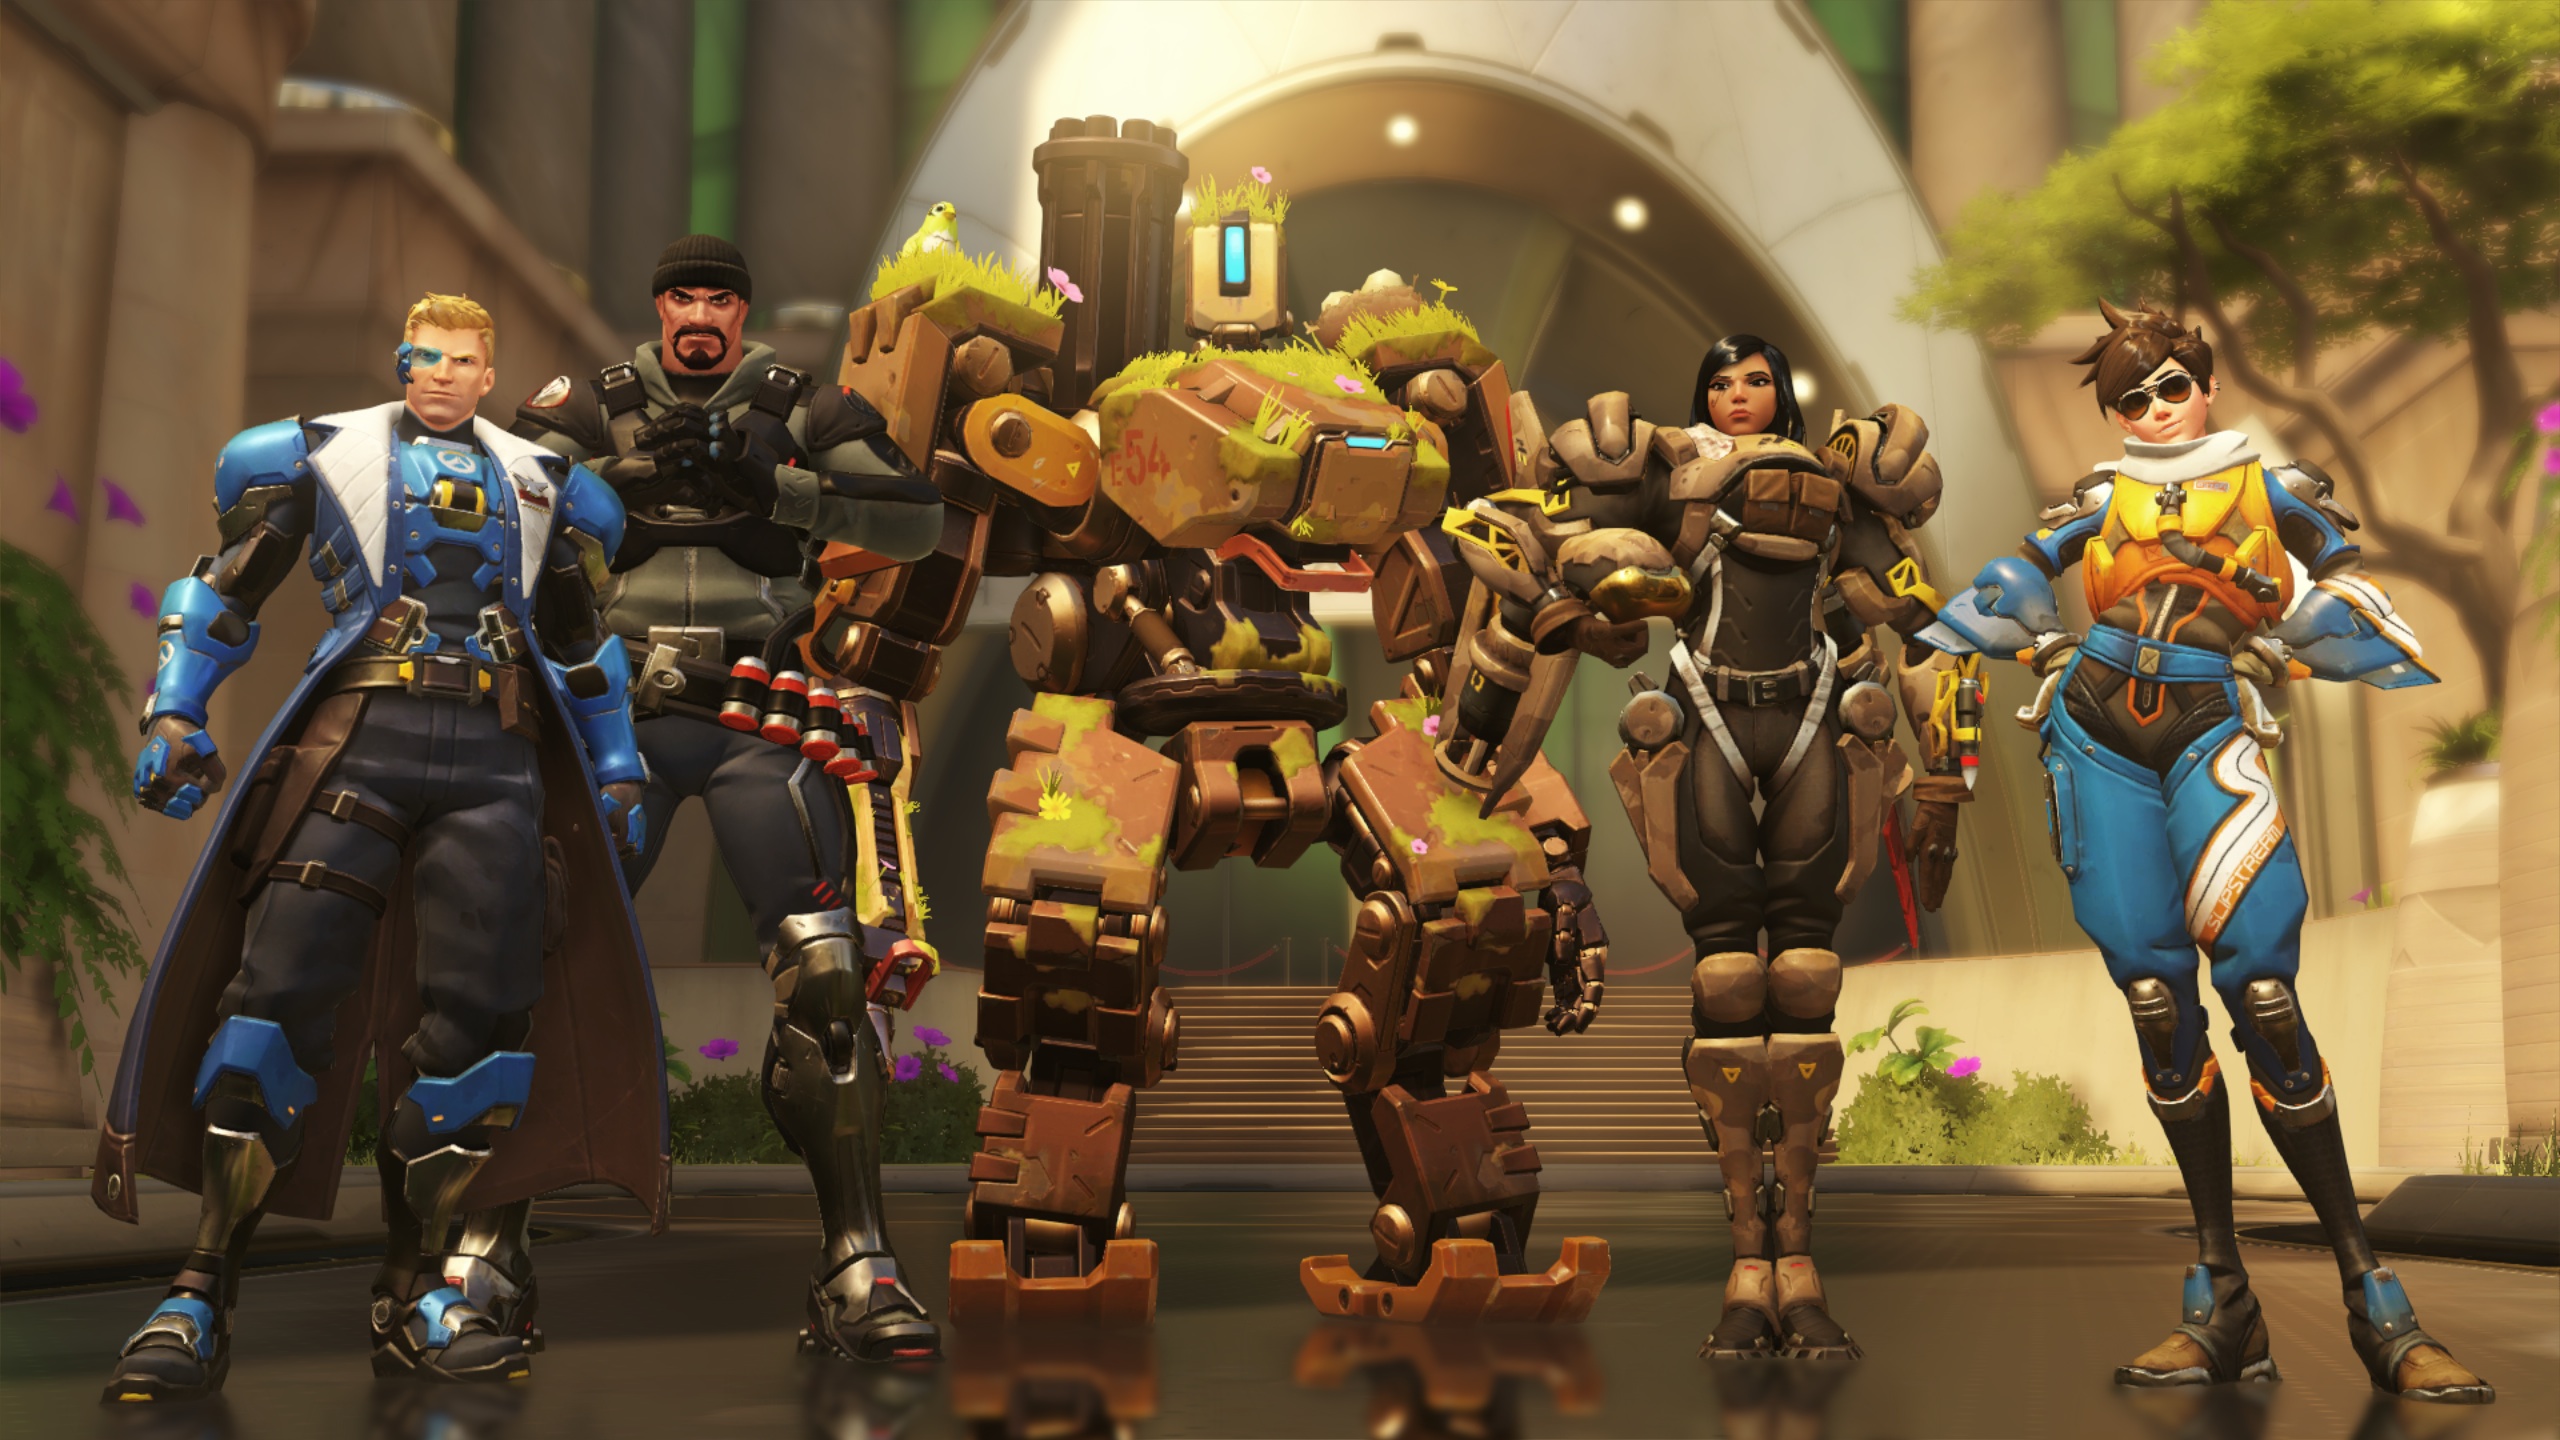 Bastion and friends.